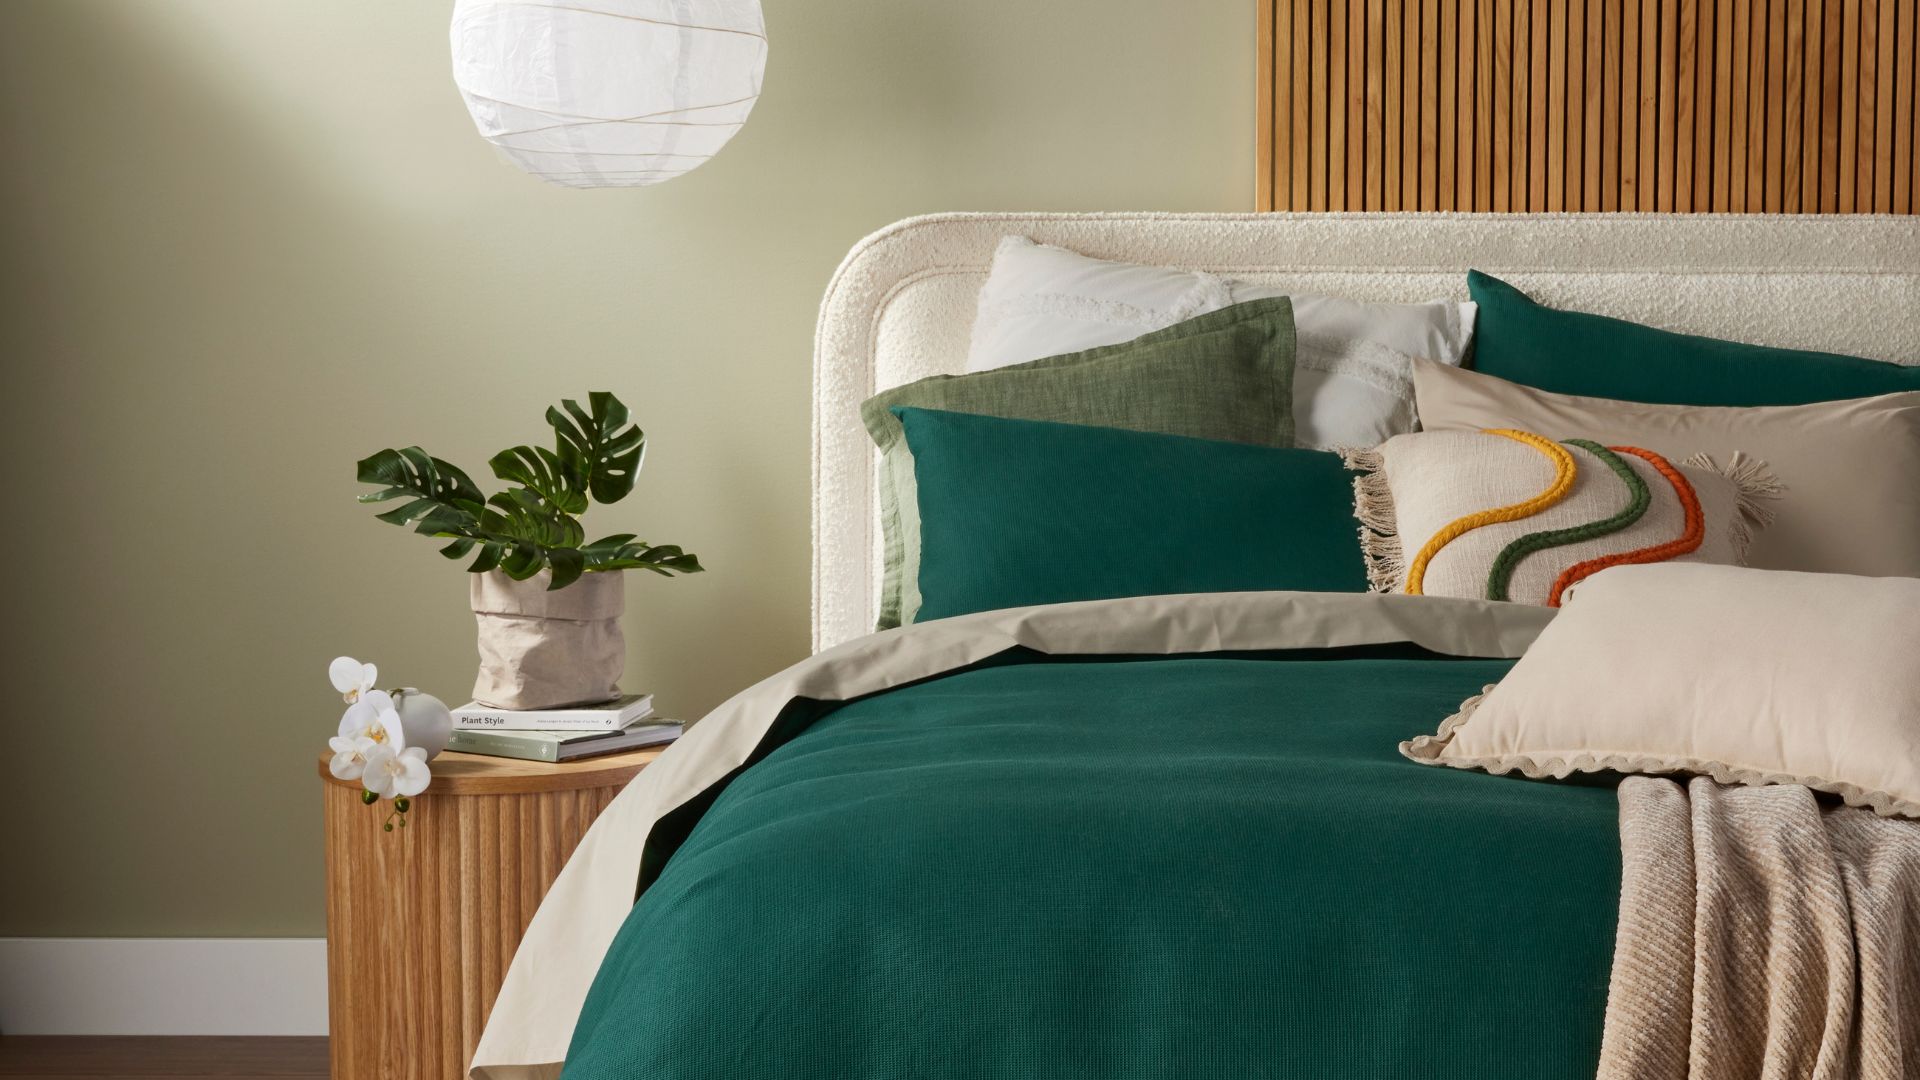 Teal bed linen and green cushions styling